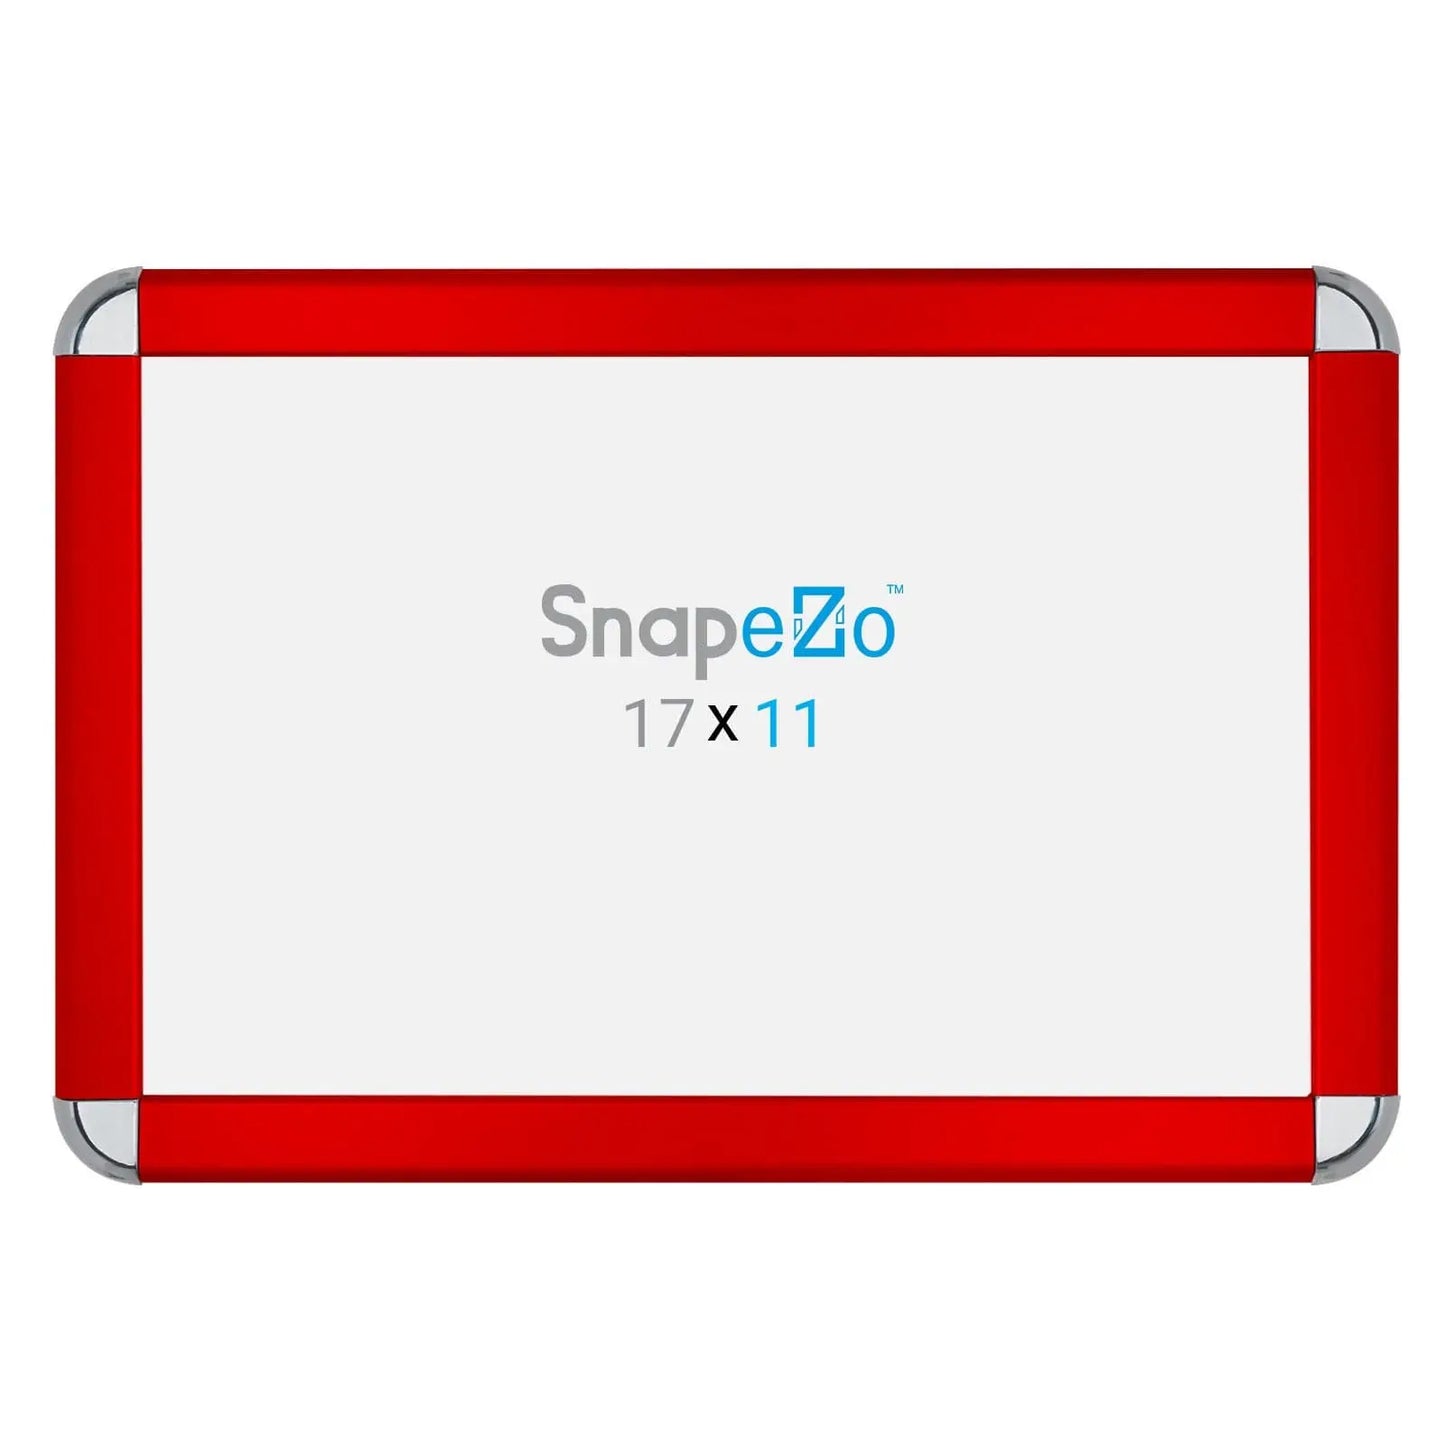 11x17 Red SnapeZo® Round-Cornered - 1.25" Profile - Snap Frames Direct